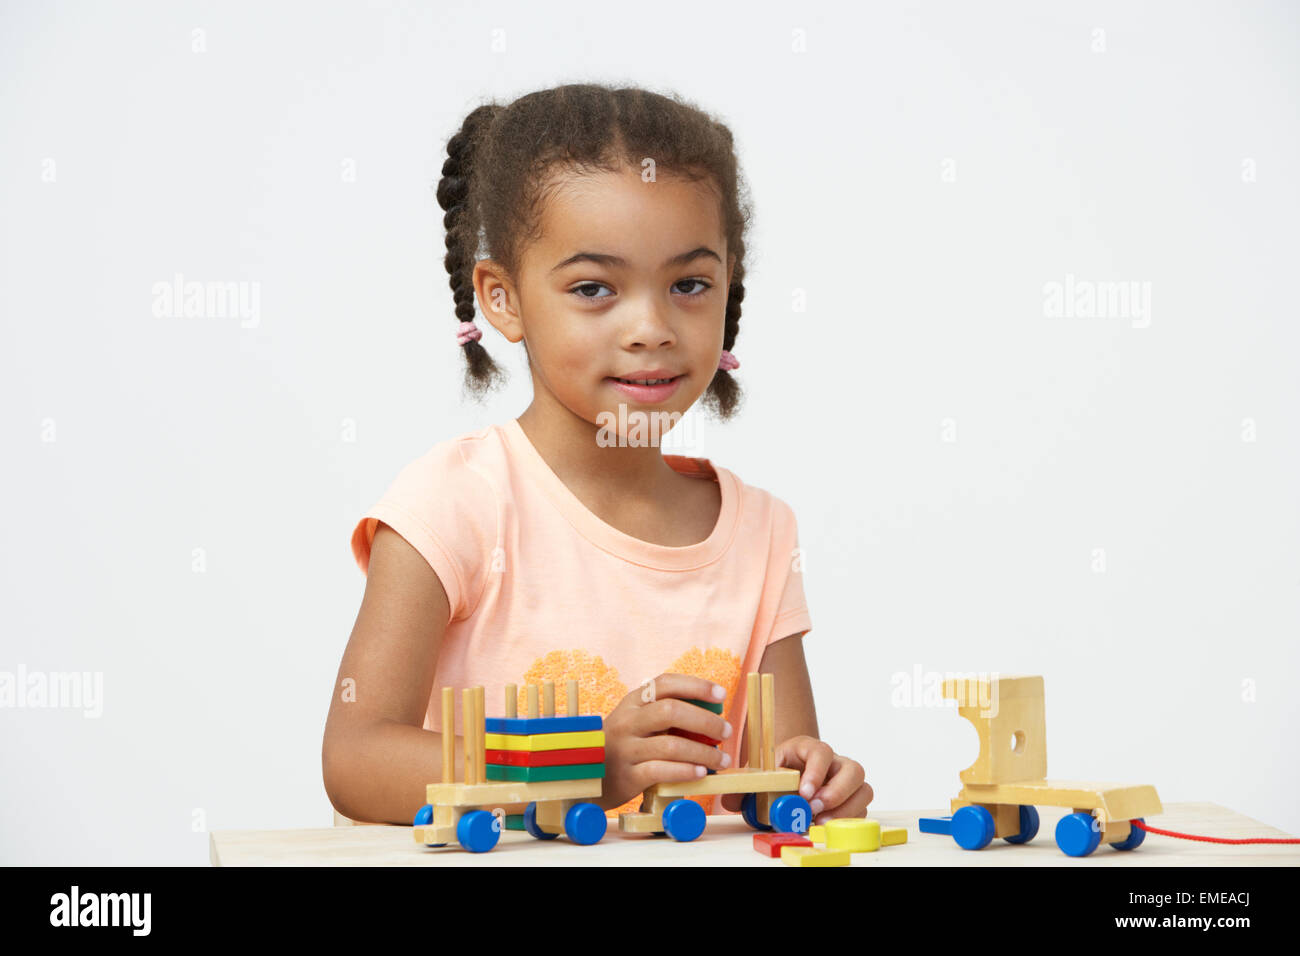 Pre-School Pupil Playing With Wooden Toy Train Stock Photo